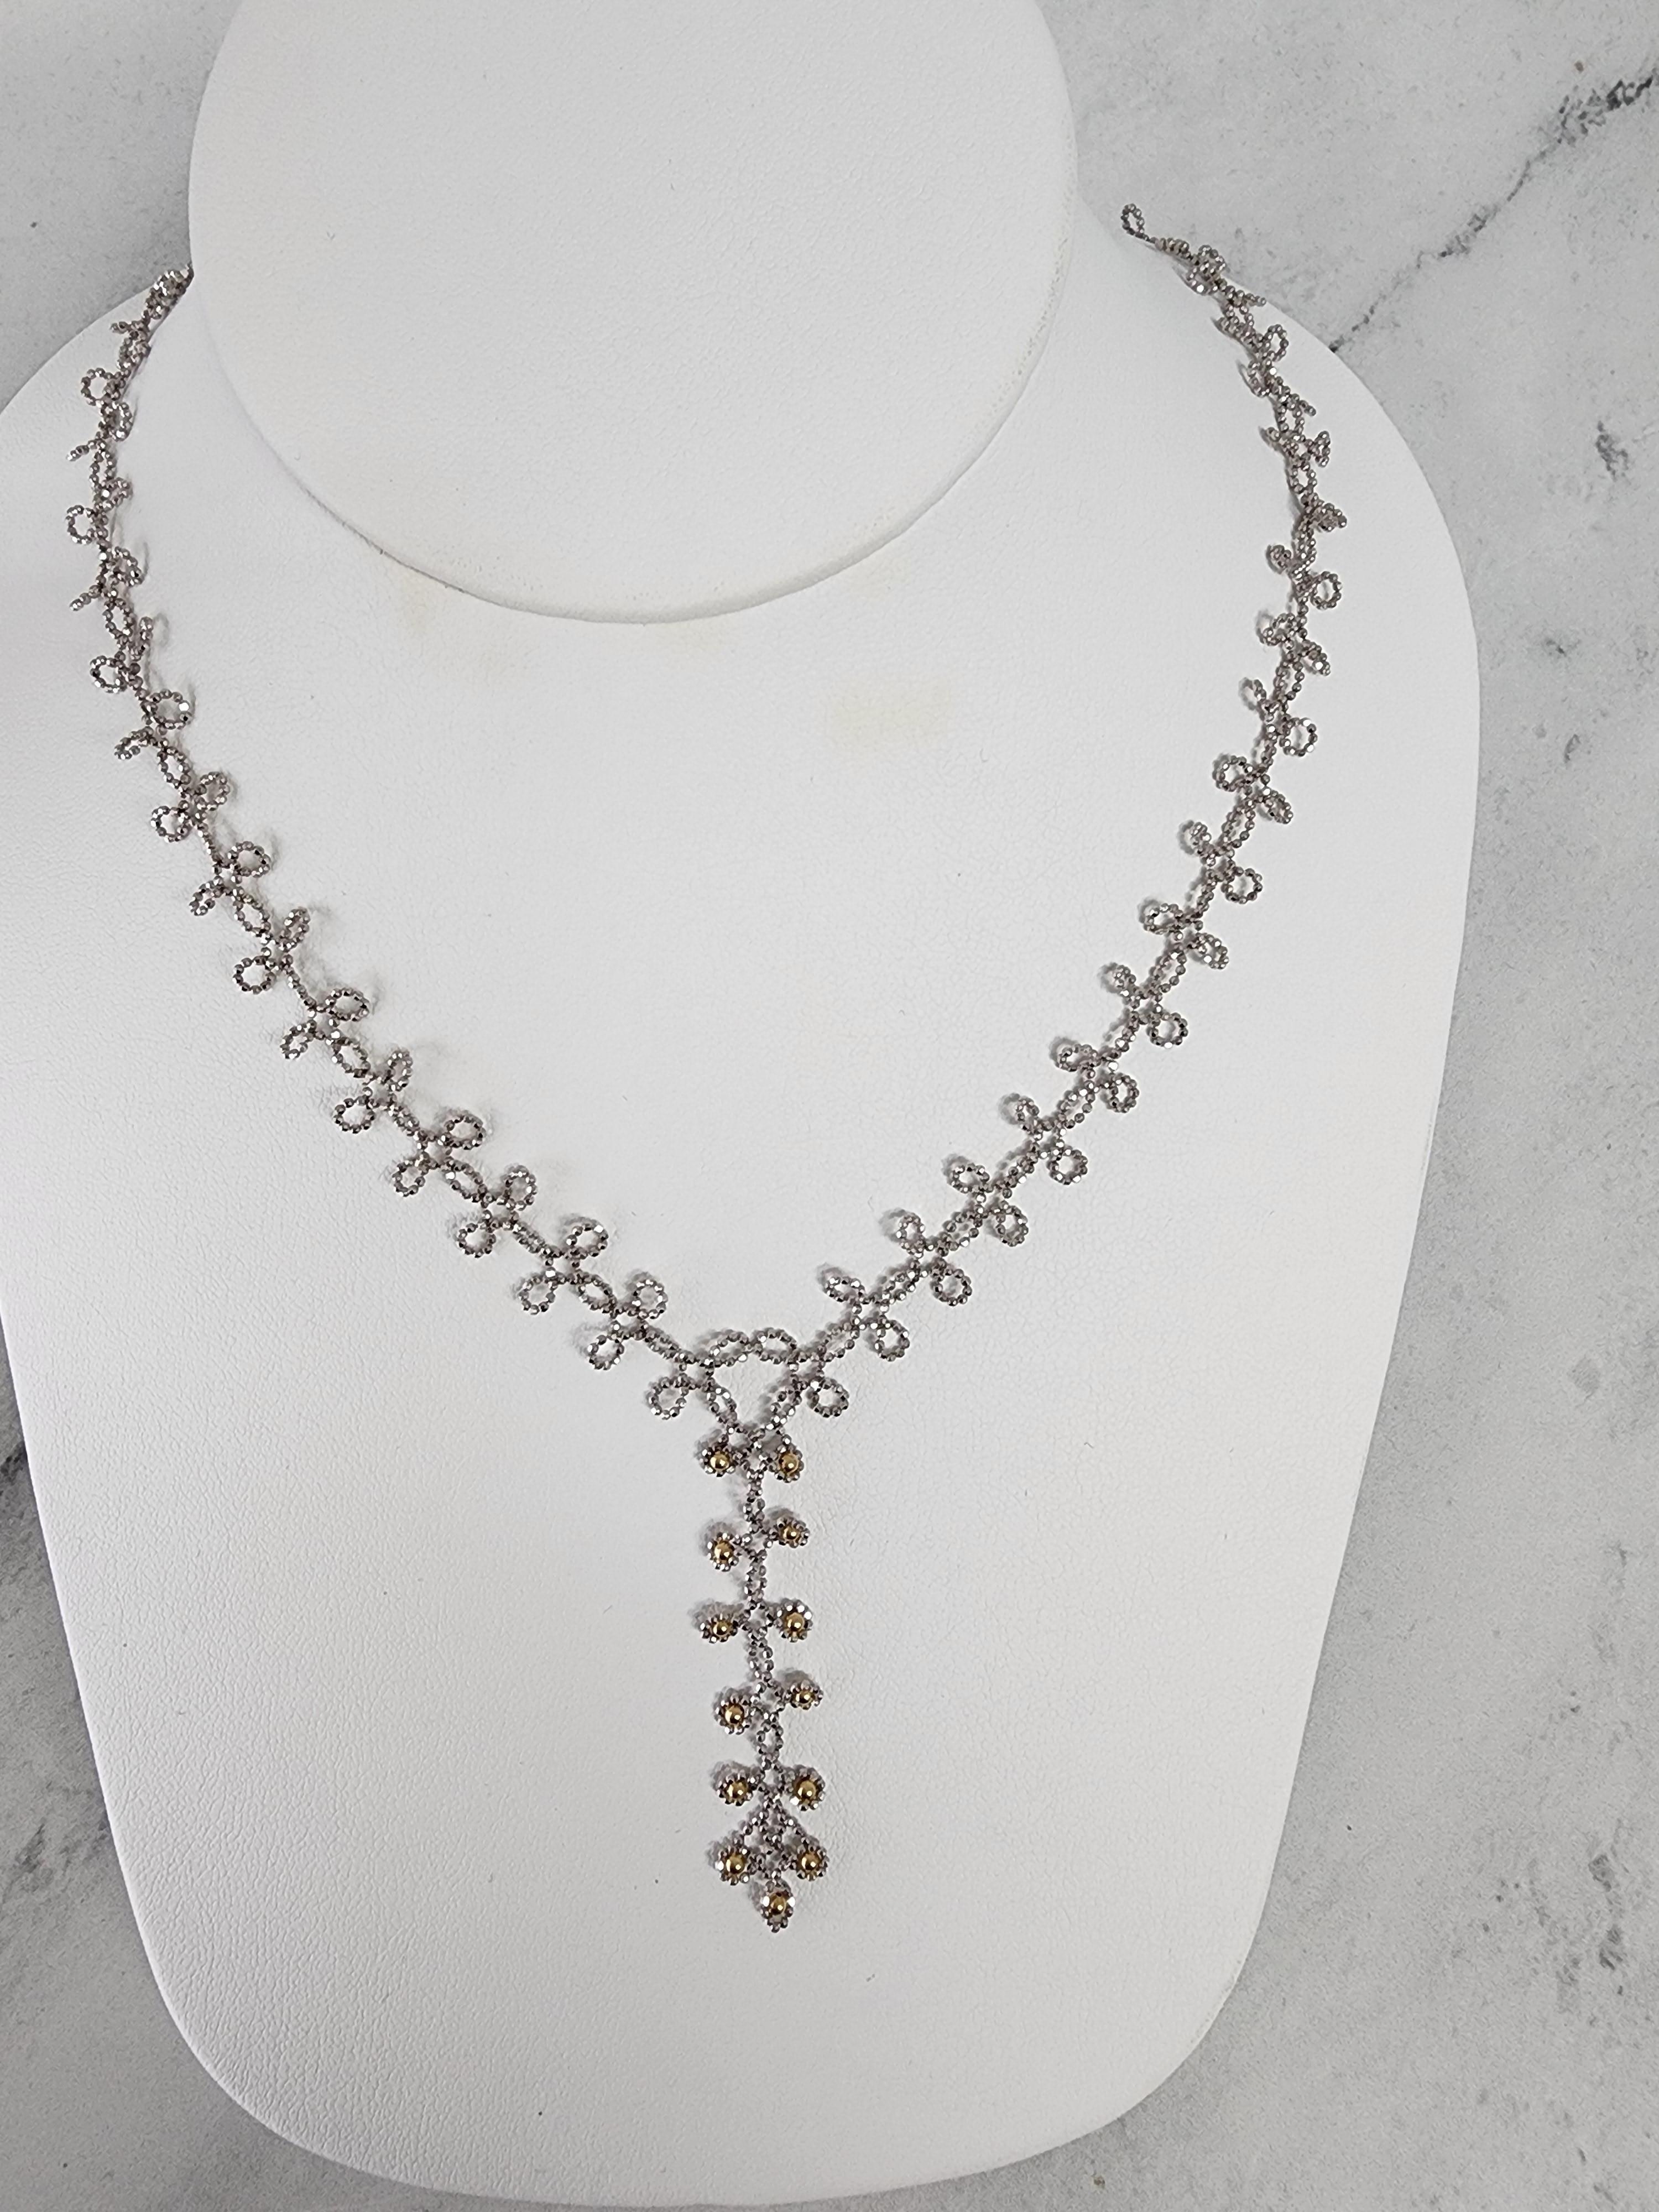 Gold Beaded Leaf Drop Necklace 14k Yellow White Gold In New Condition For Sale In Sugar Land, TX